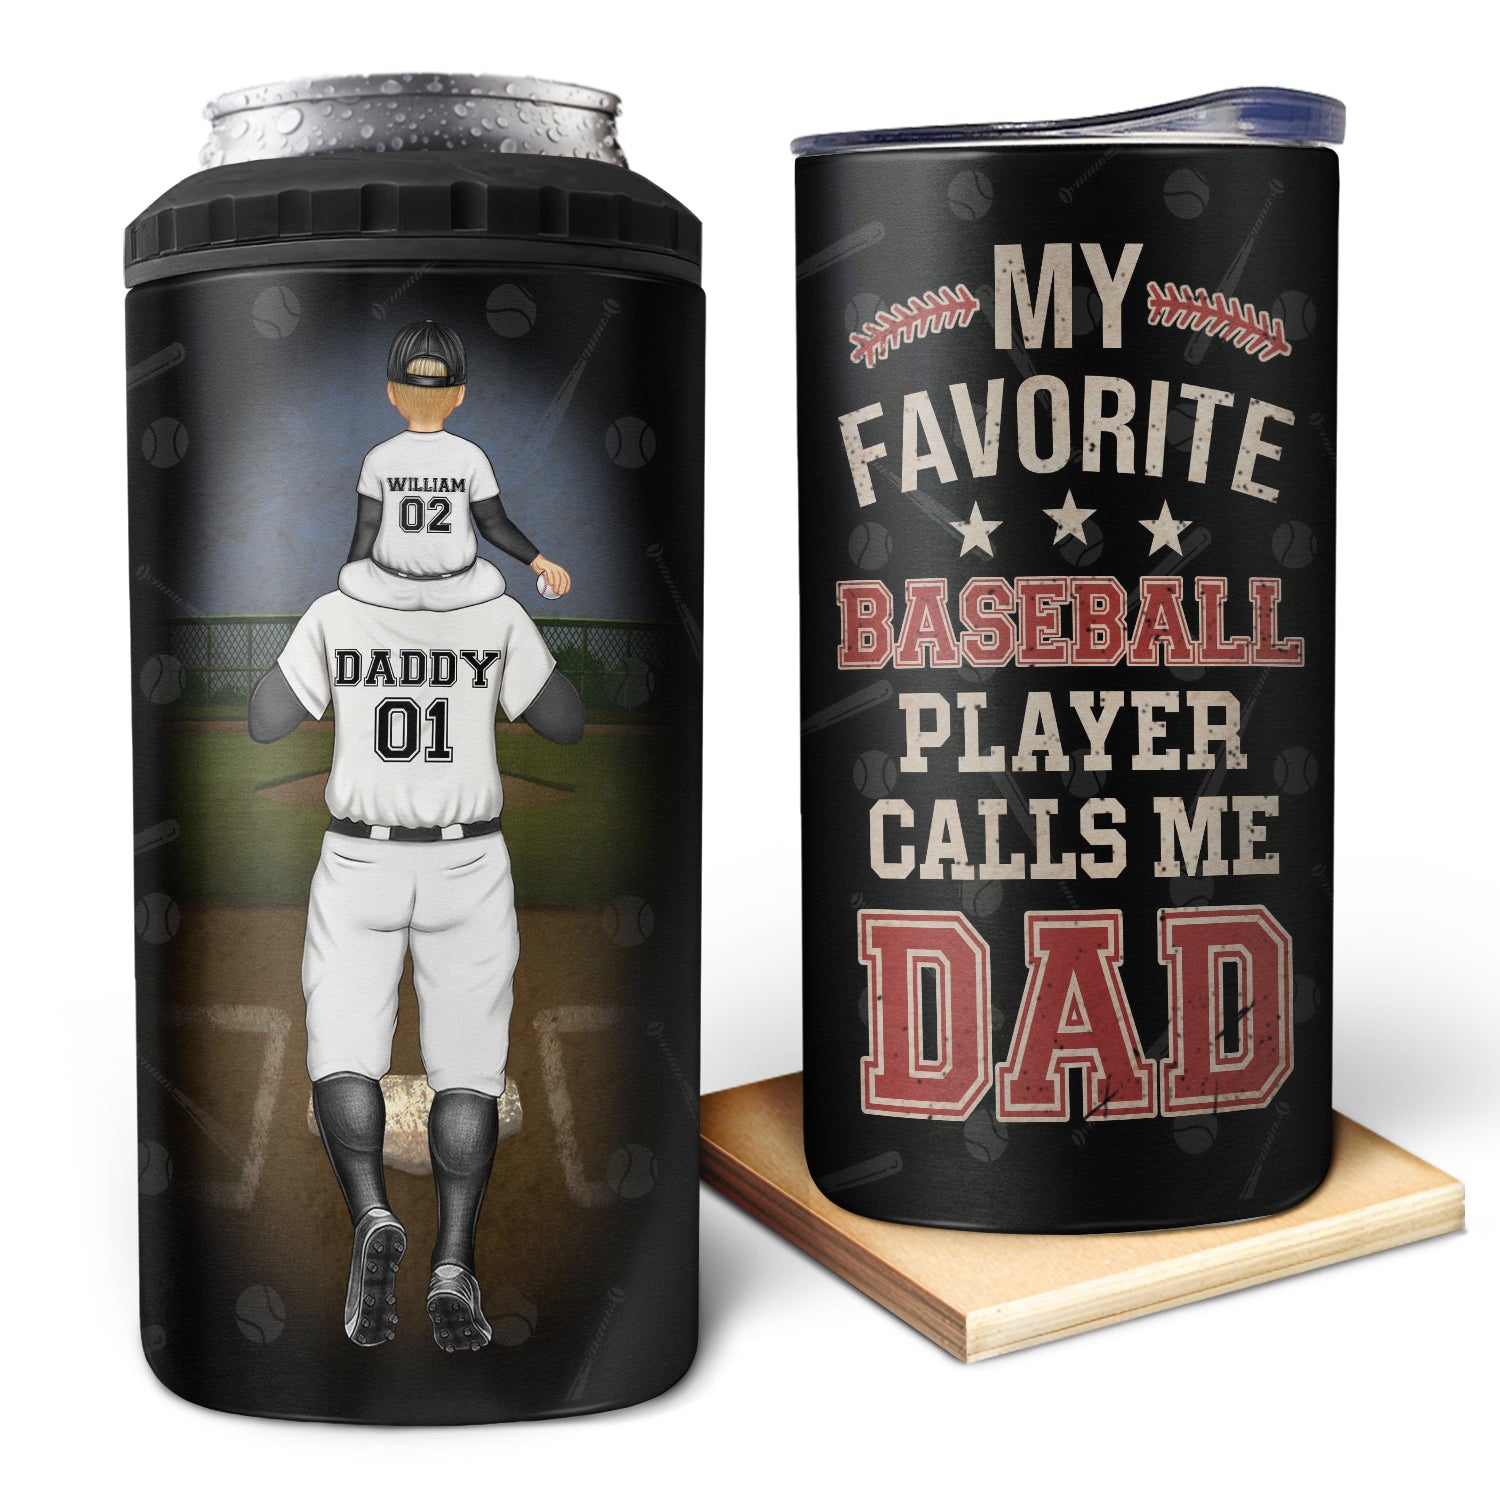 My Favorite Baseball Player Calls Me Dad - Gift For Father, Sport Fans - Personalized 4 In 1 Can Cooler Tumbler